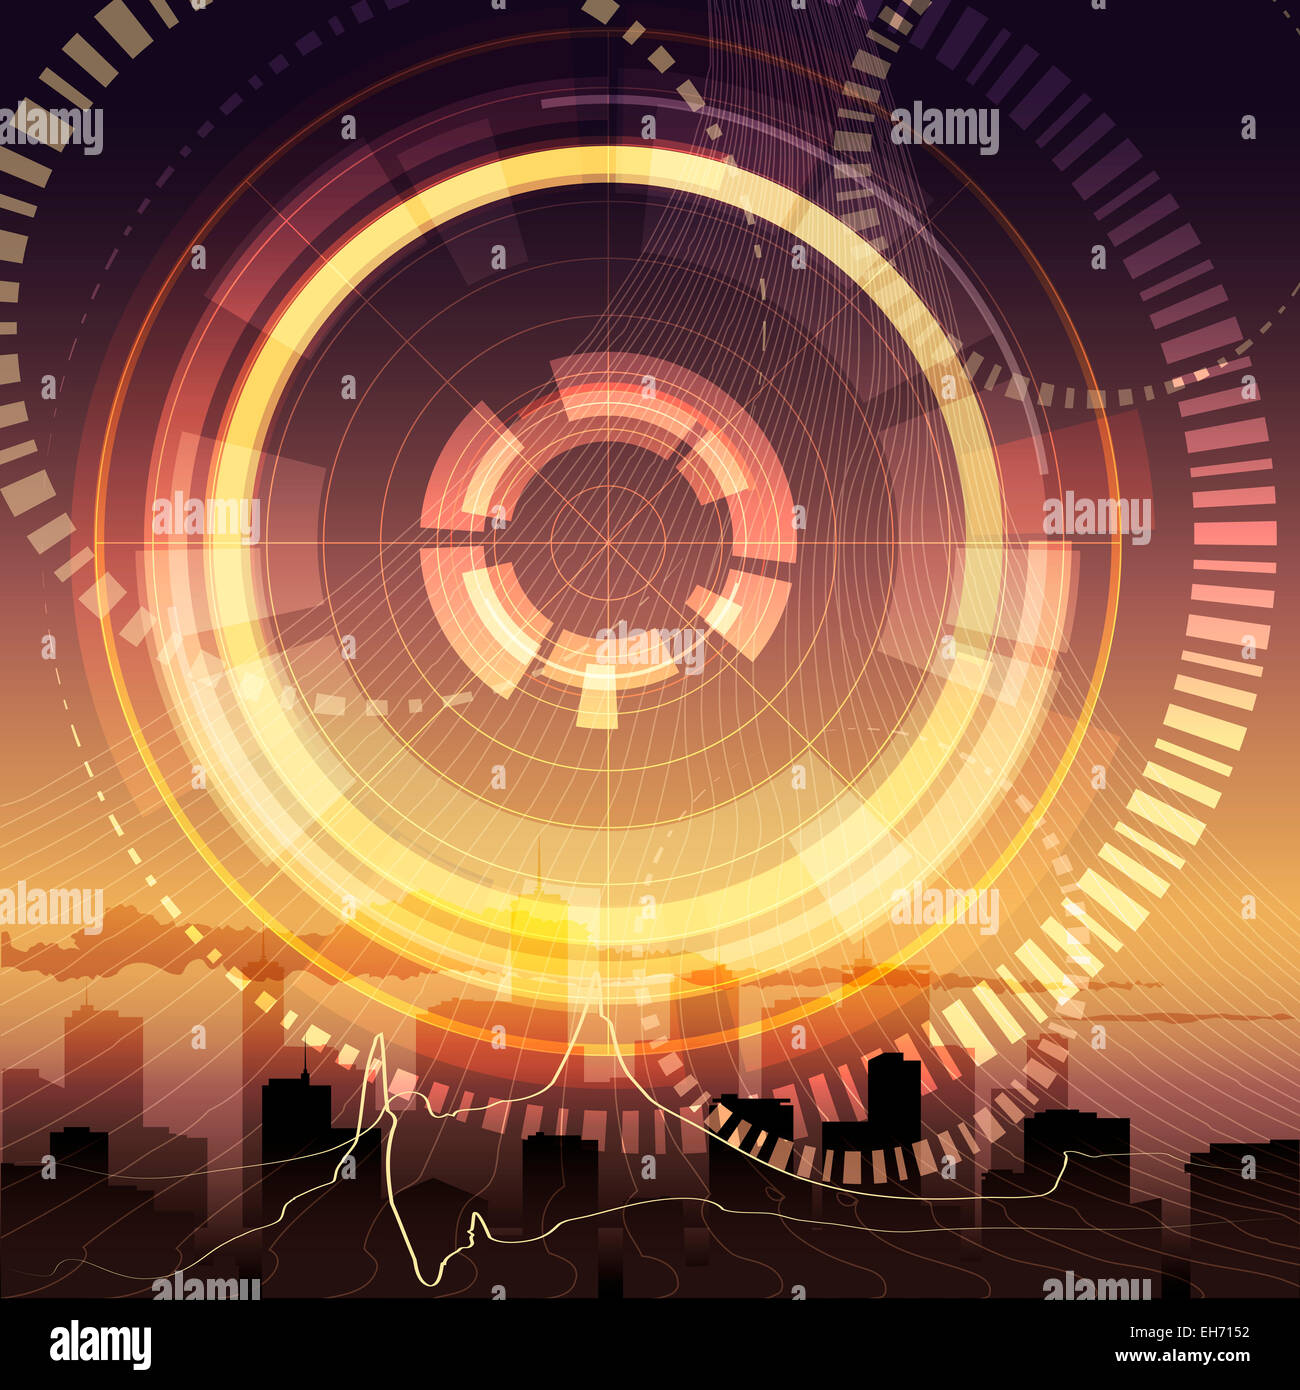 Illustration with abstract wheel and geometrical elements as metaphor of new communication technologies against cityscape during Stock Photo